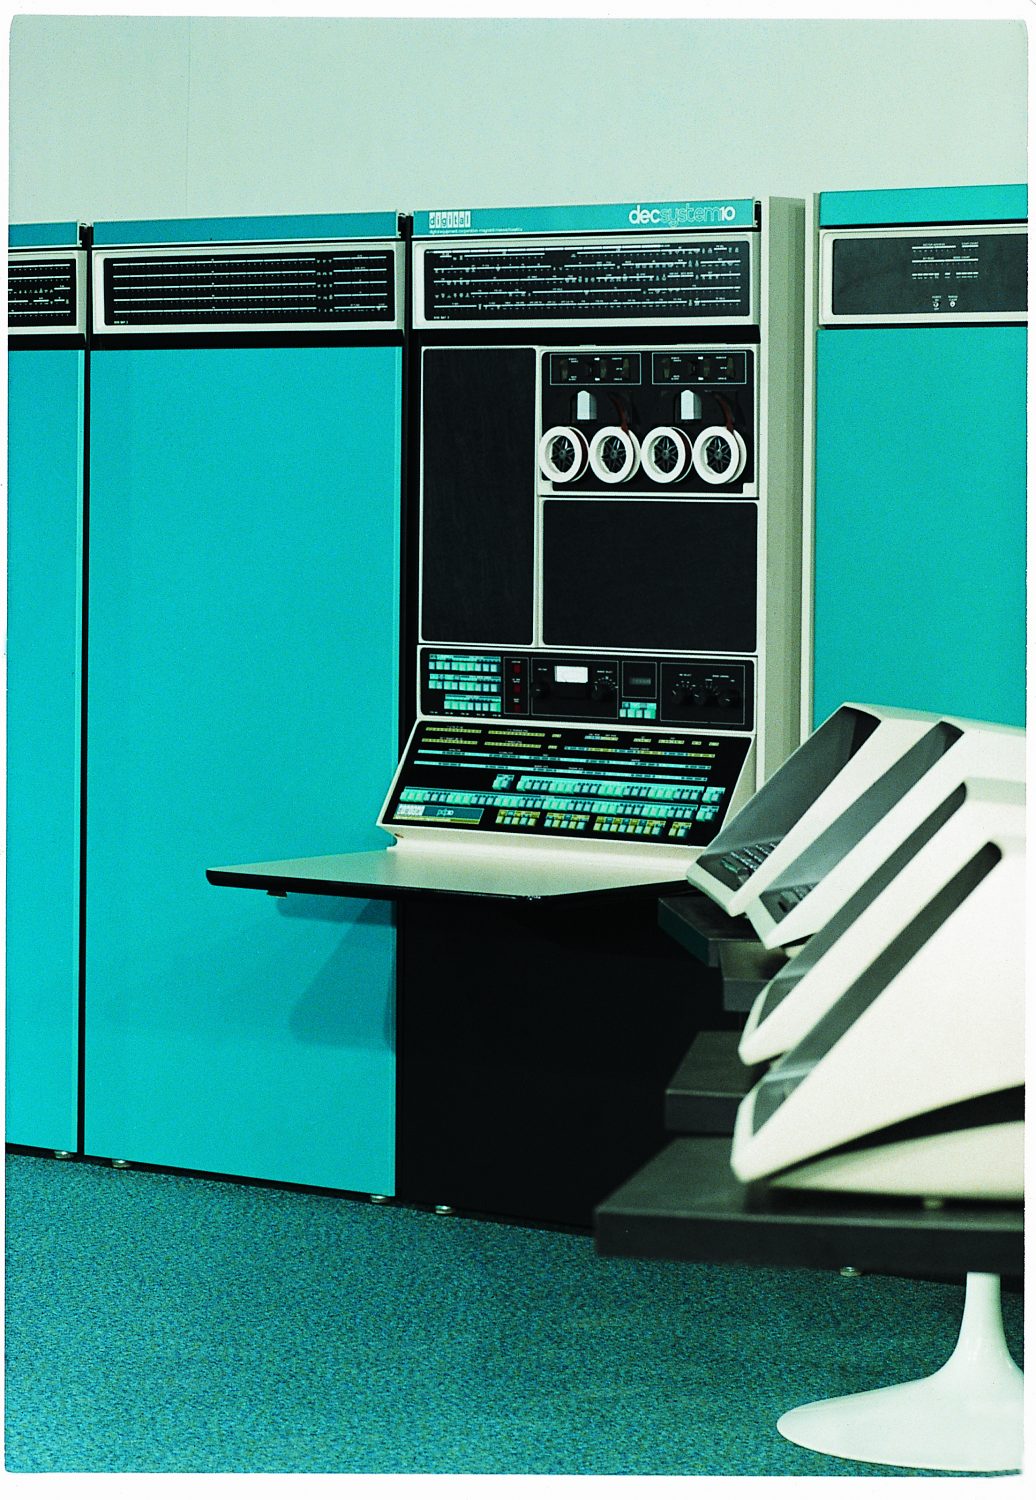 Photo of Digital Equipment Corporation's PDP-10 featuring large teal units and several terminals.